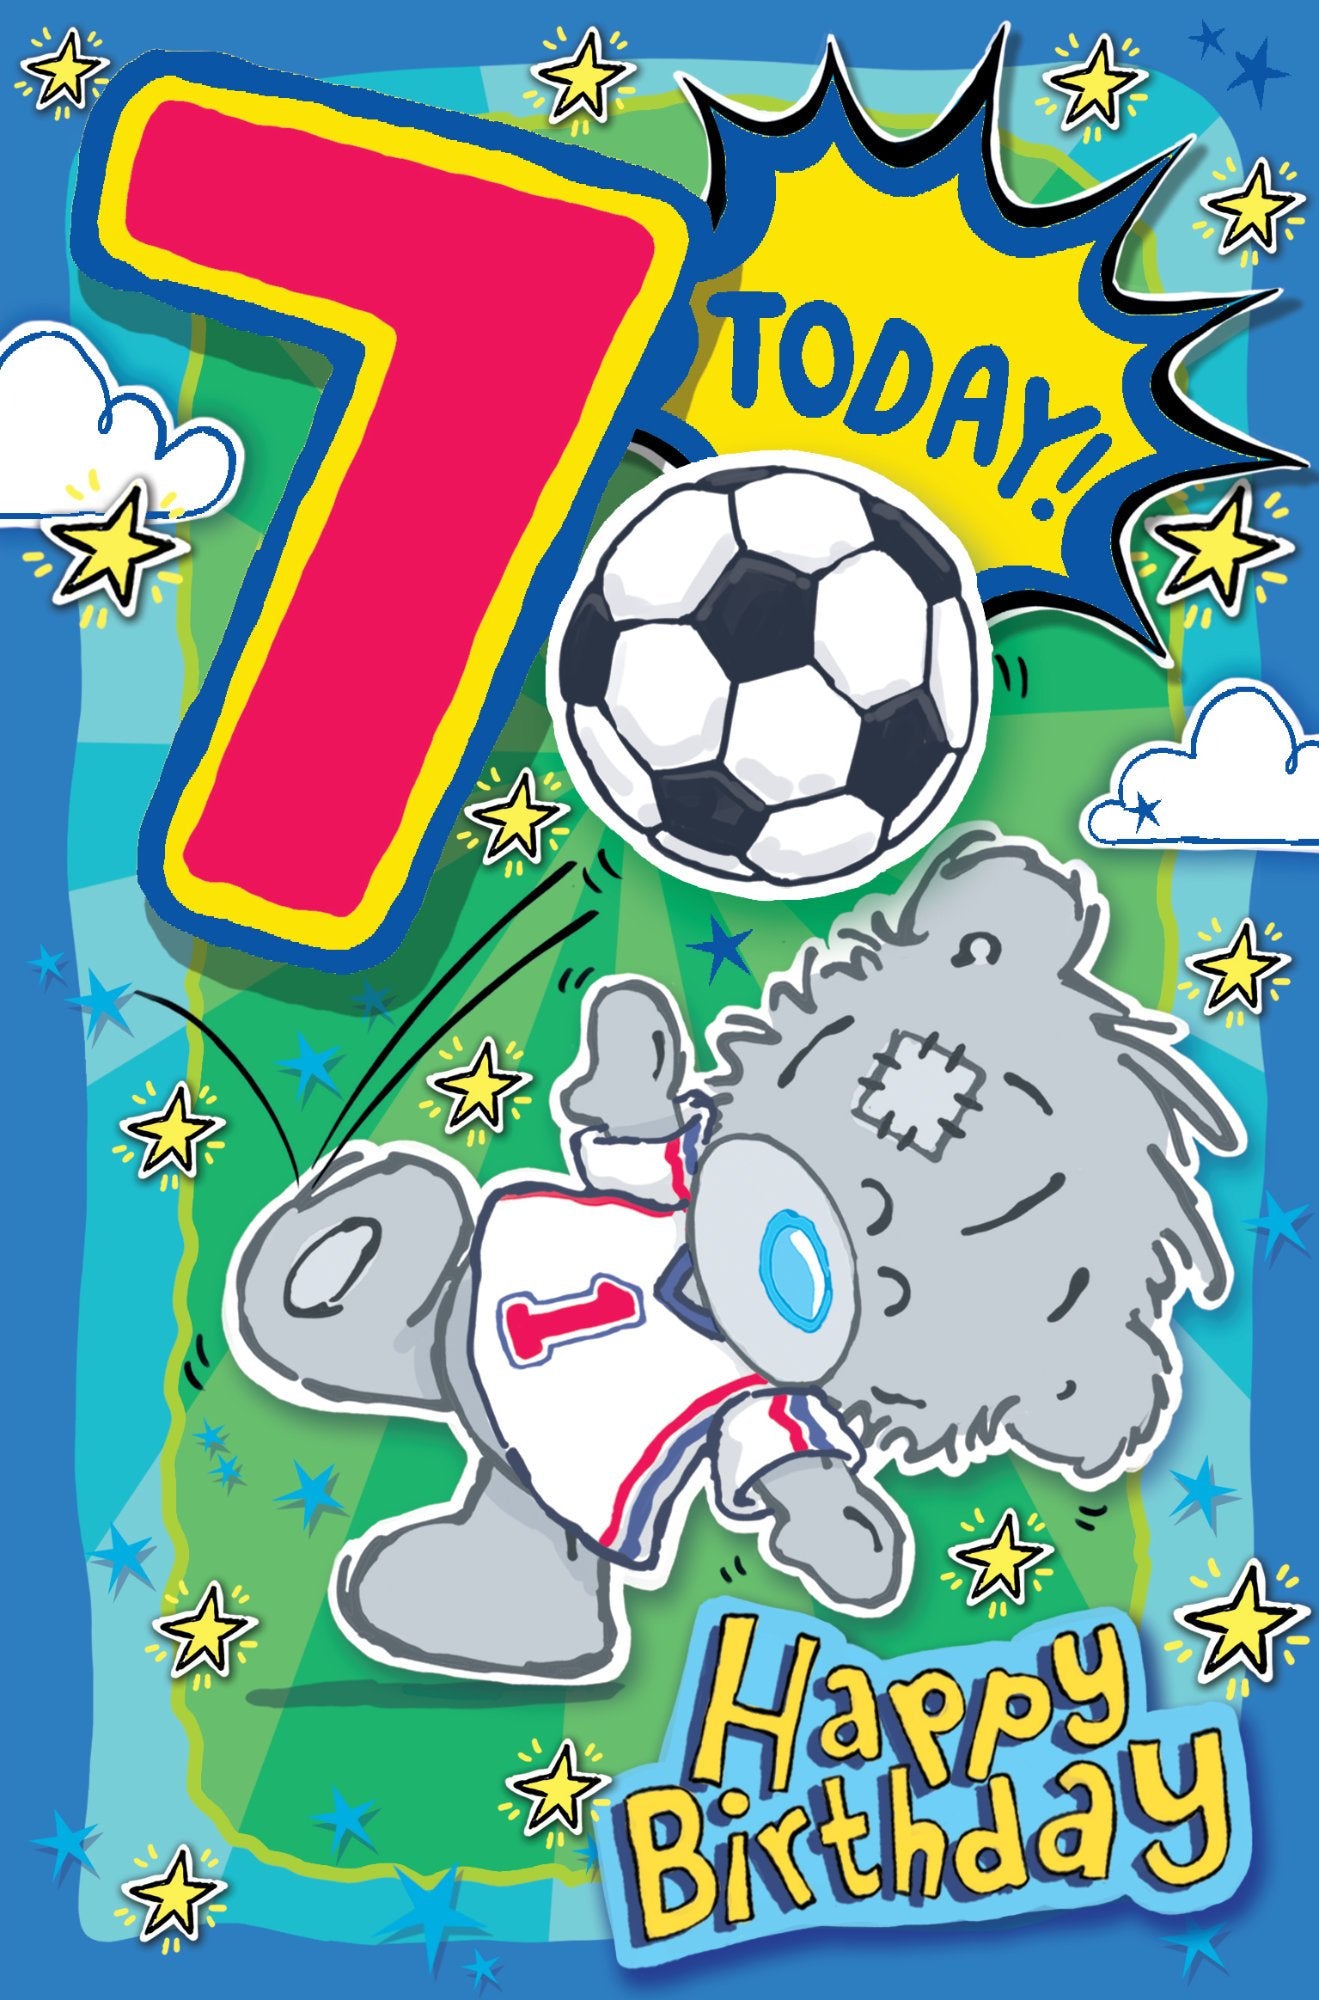 Photograph of 7th Birthday Football Teddy Greetings Card at Nicole's Shop